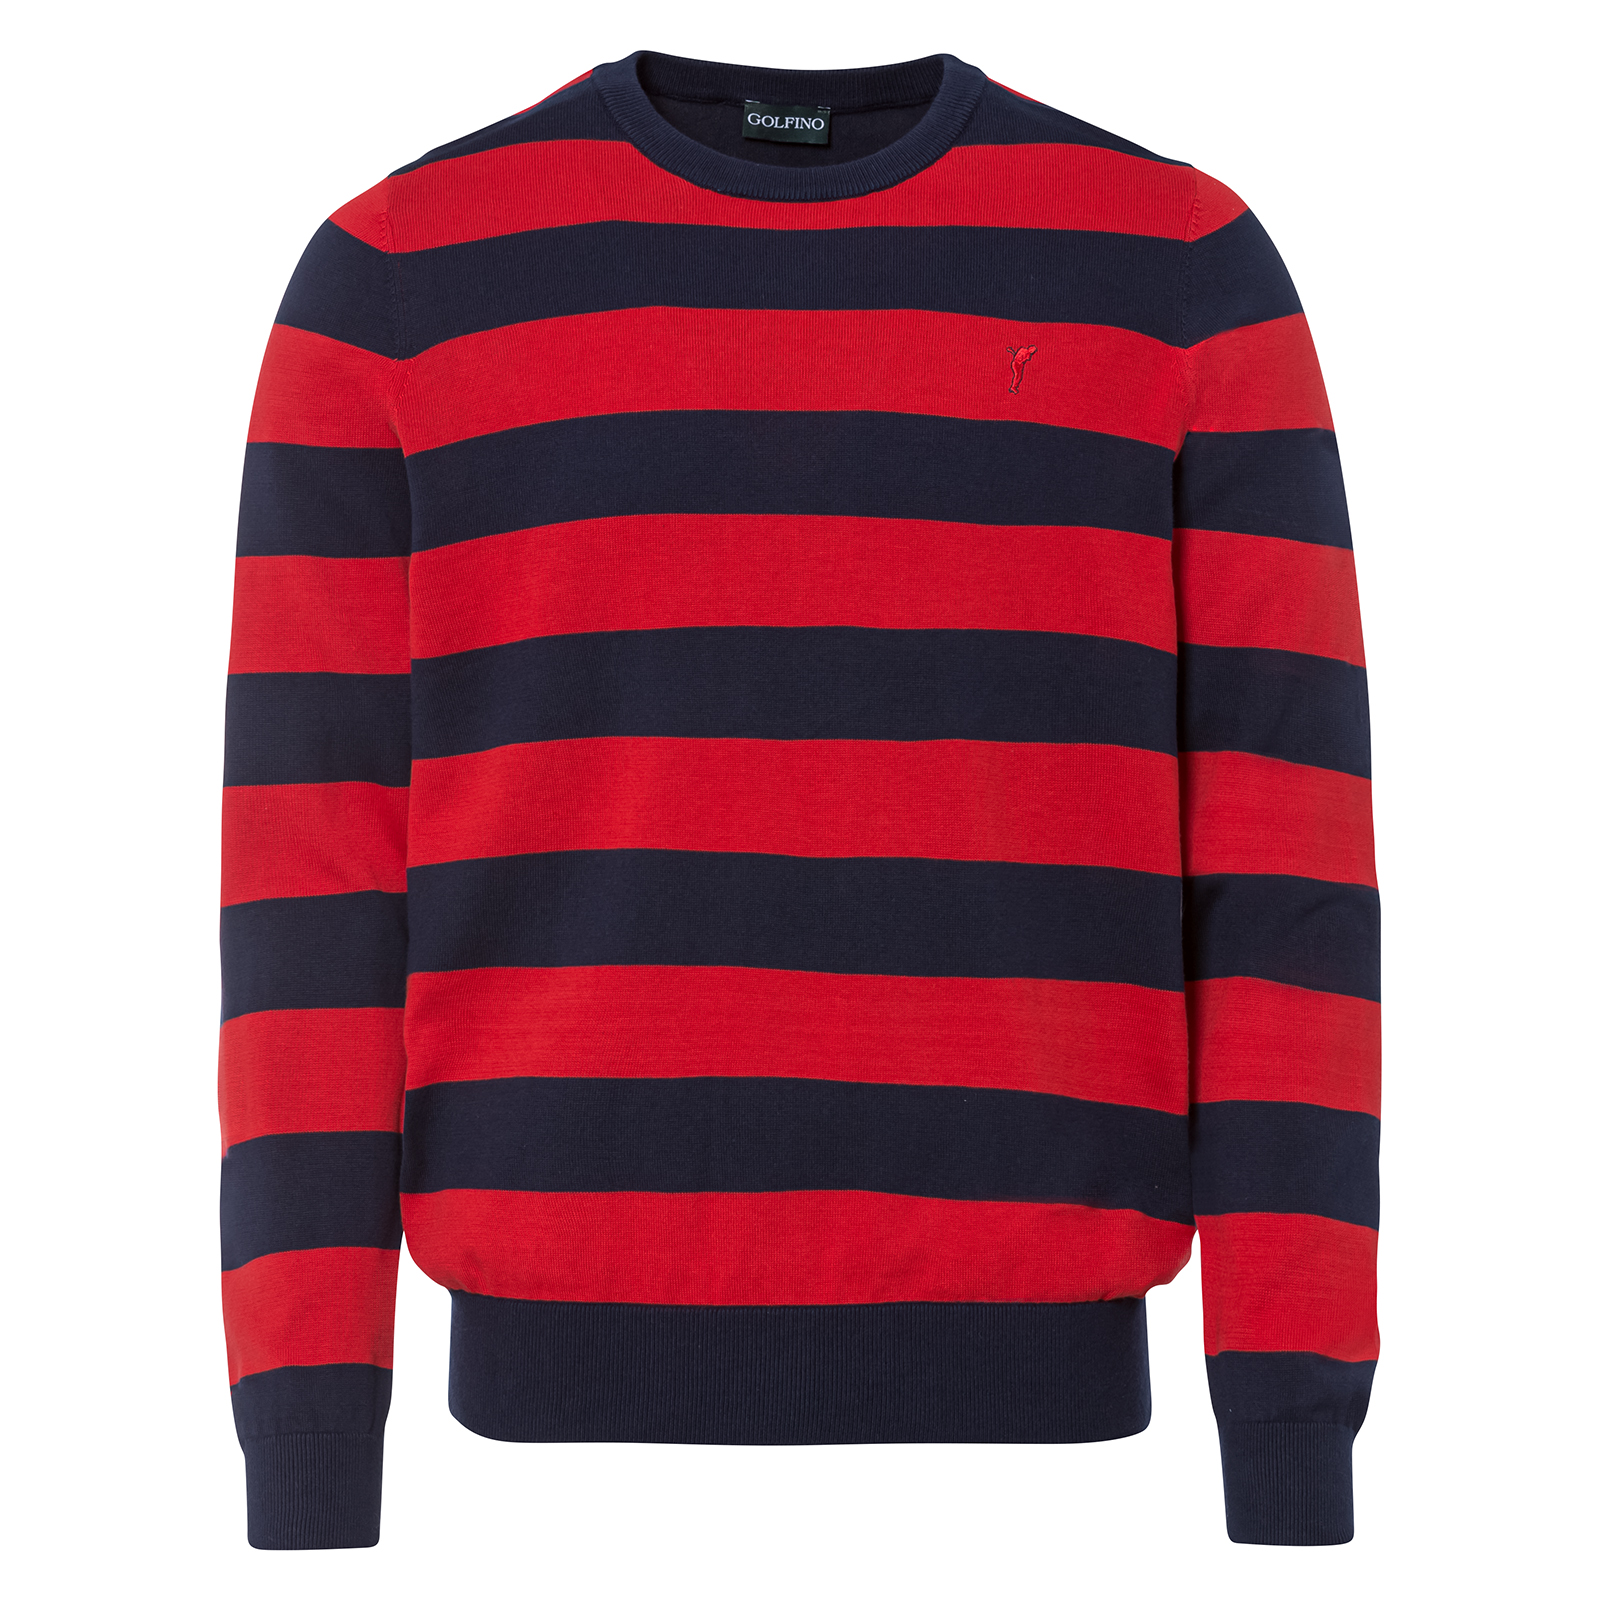 Men's knitted crew neck sweater in Pima cotton 